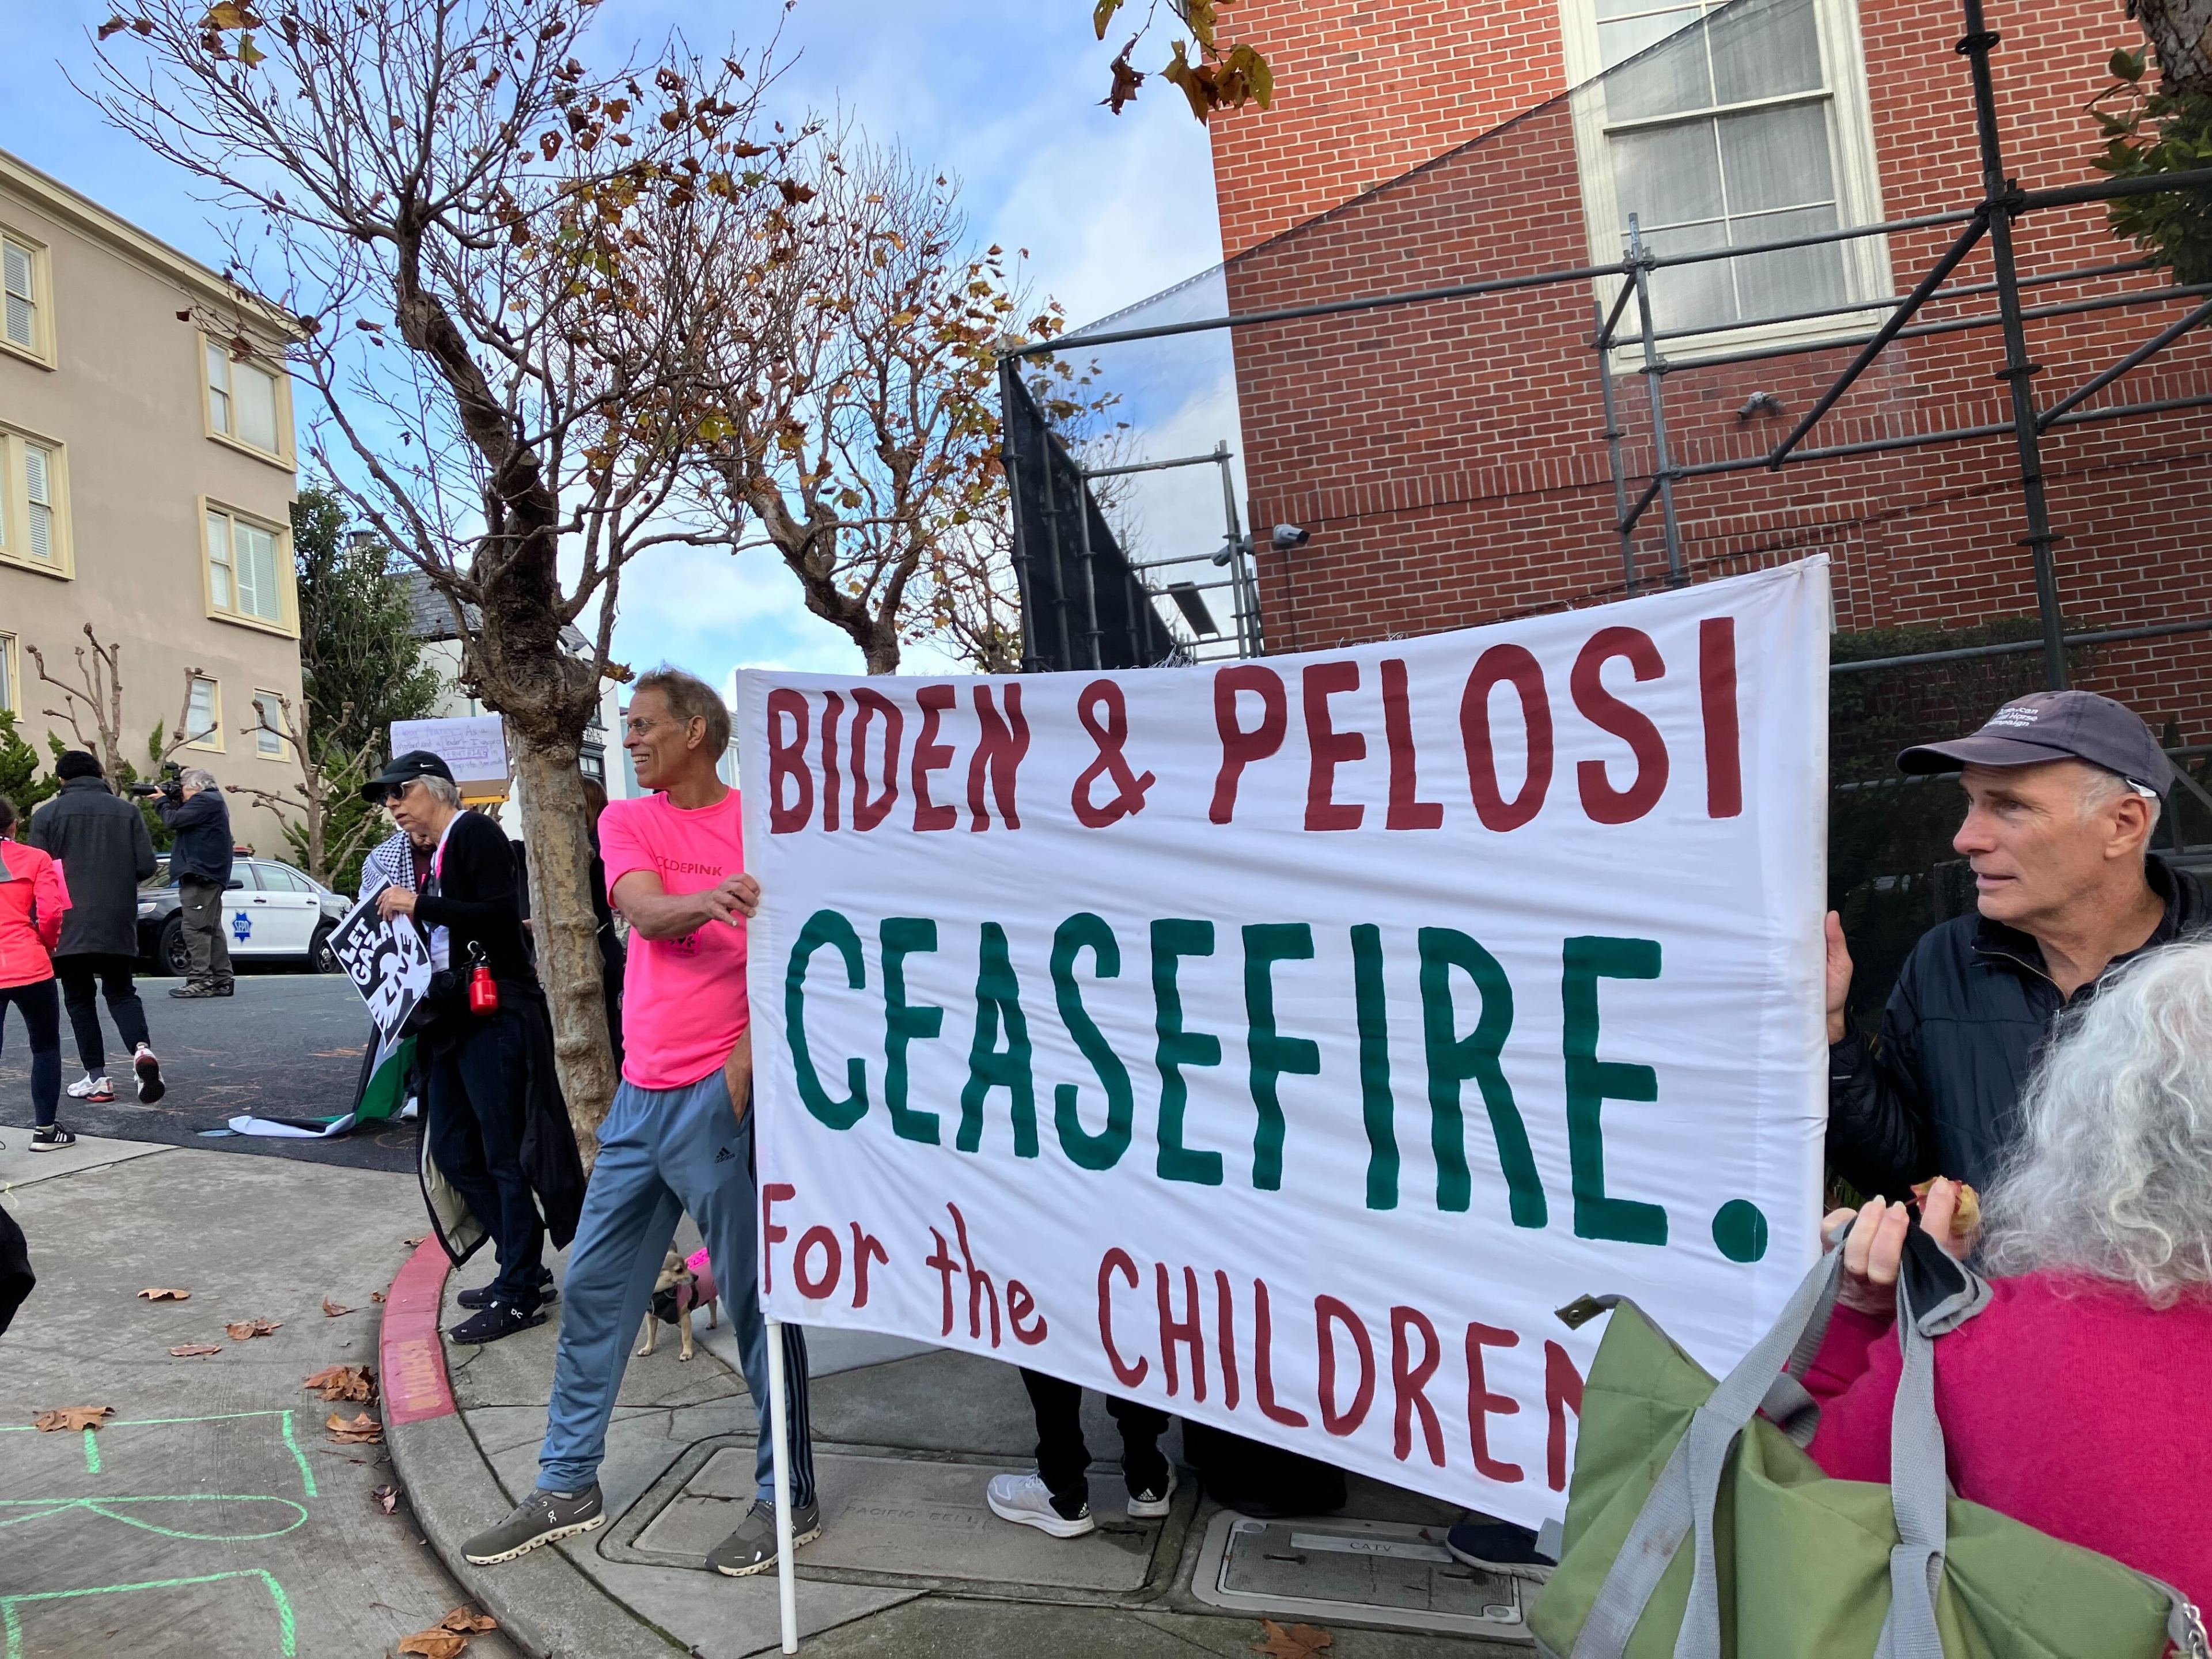 People gather on a street corner with sign that says Biden and Pelosi ceasefire for the children